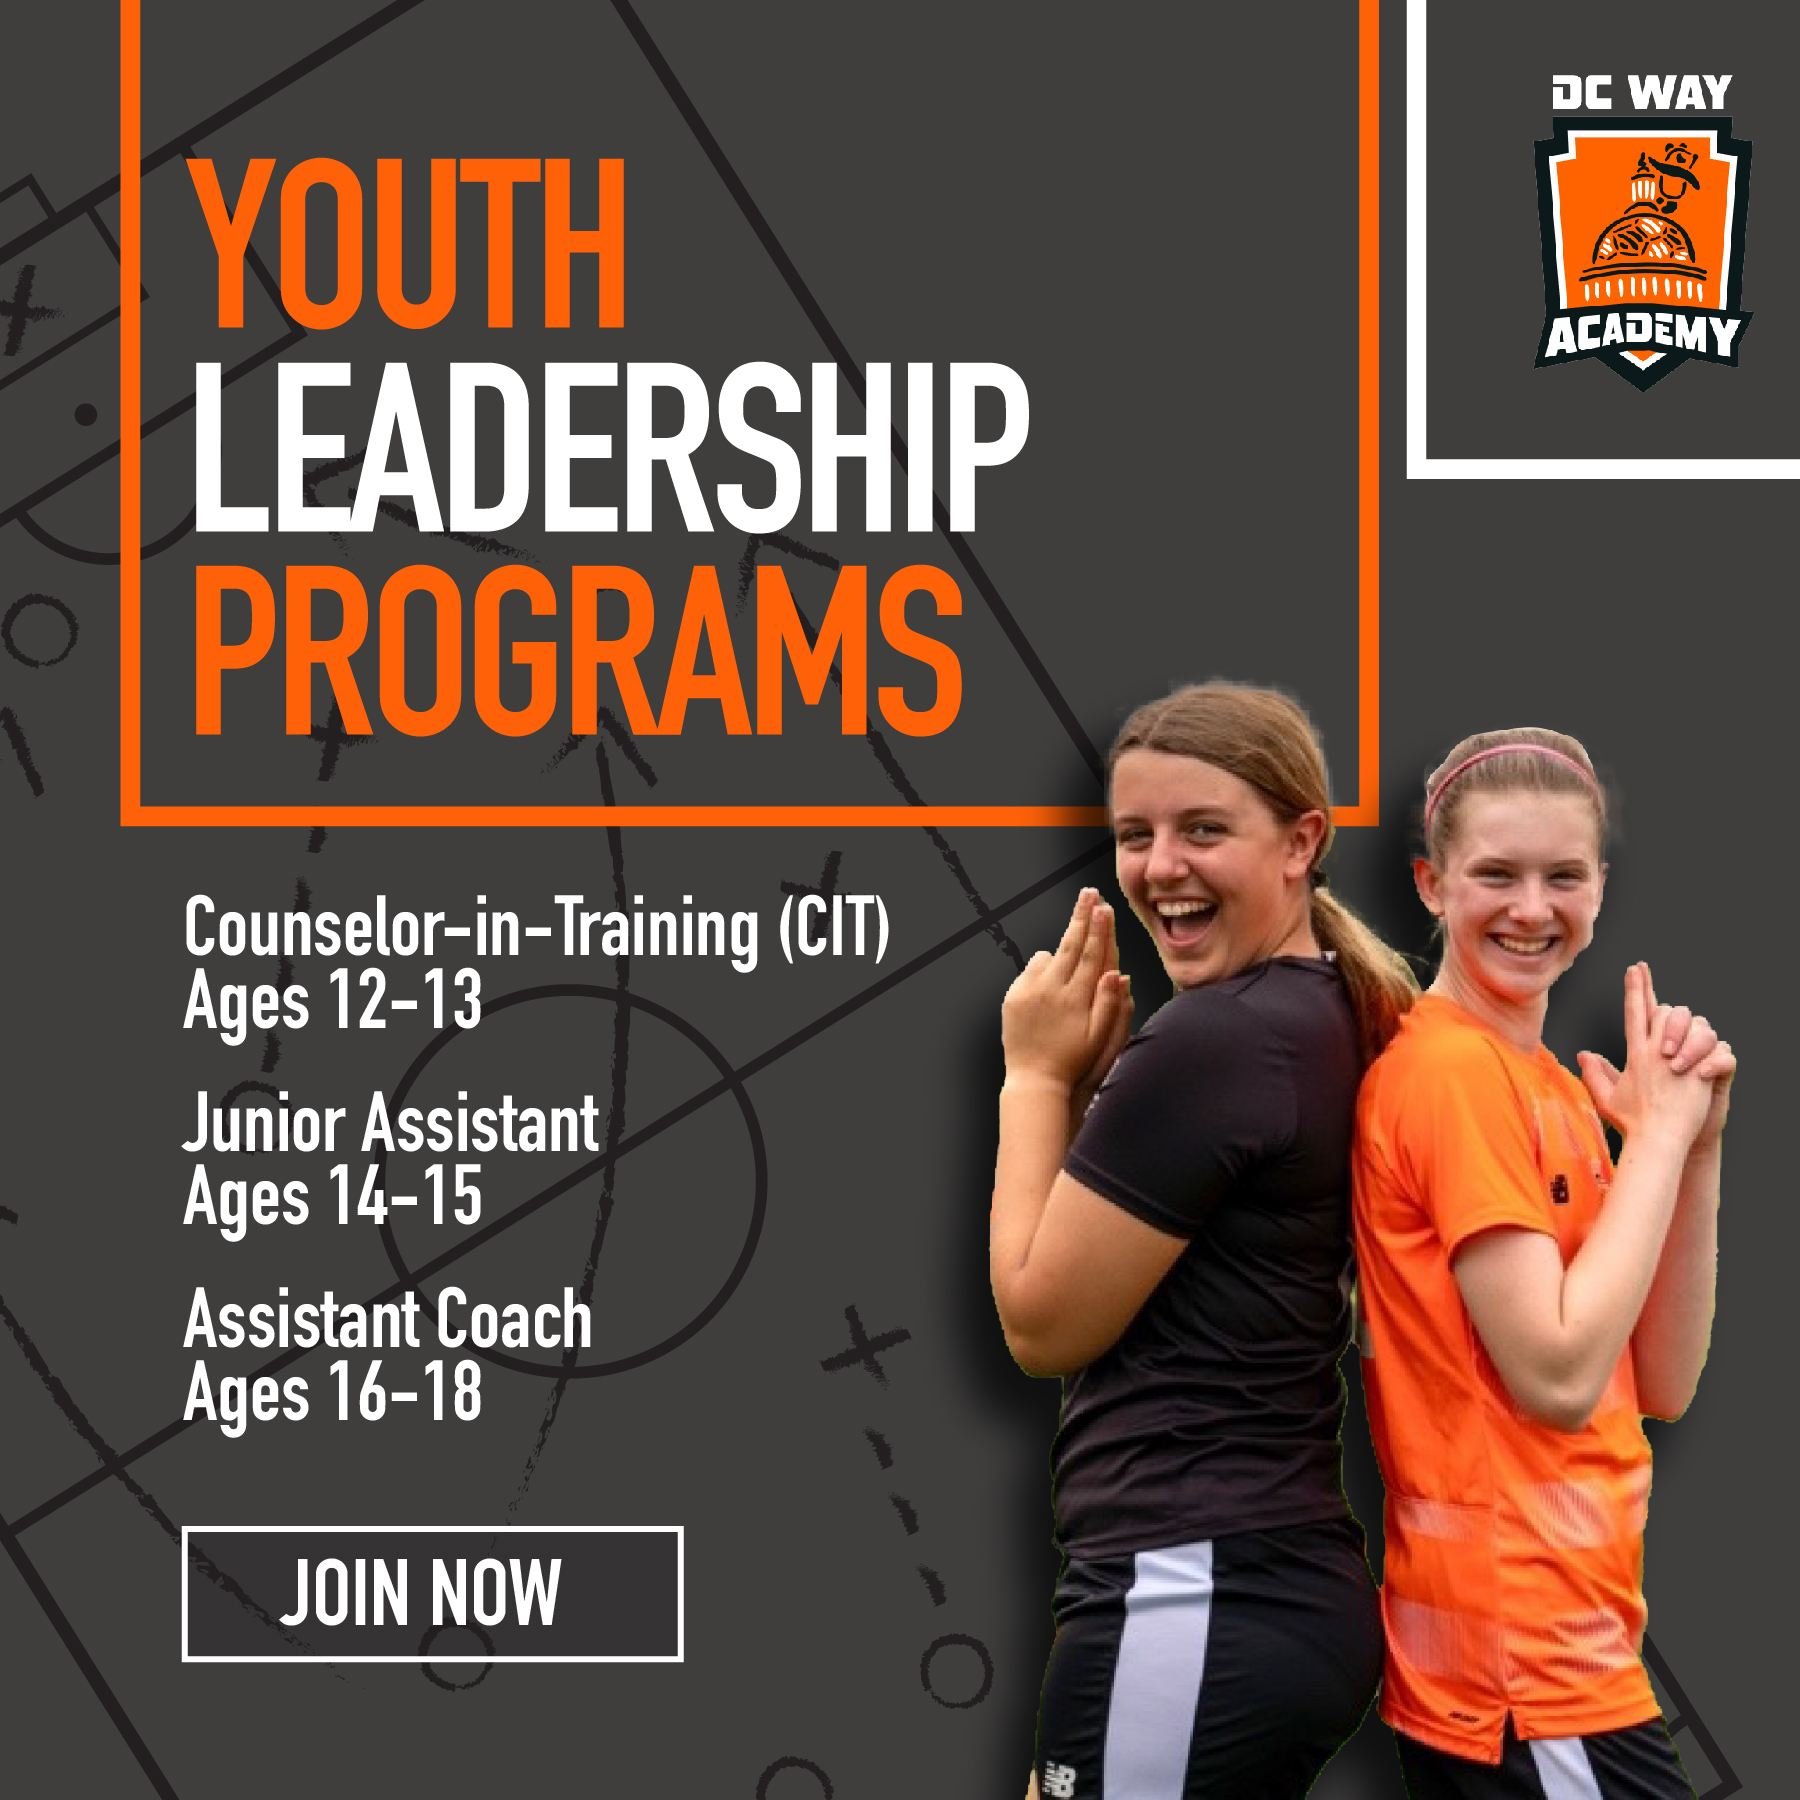 Ready to take your passion for soccer to the next level? ⚽️ Don't miss out on the incredible opportunities offered by DC Way Academy's Youth Leadership Programs! 💯
 
Whether you're a soccer enthusiast or simply seeking valuable volunteer opportuniti